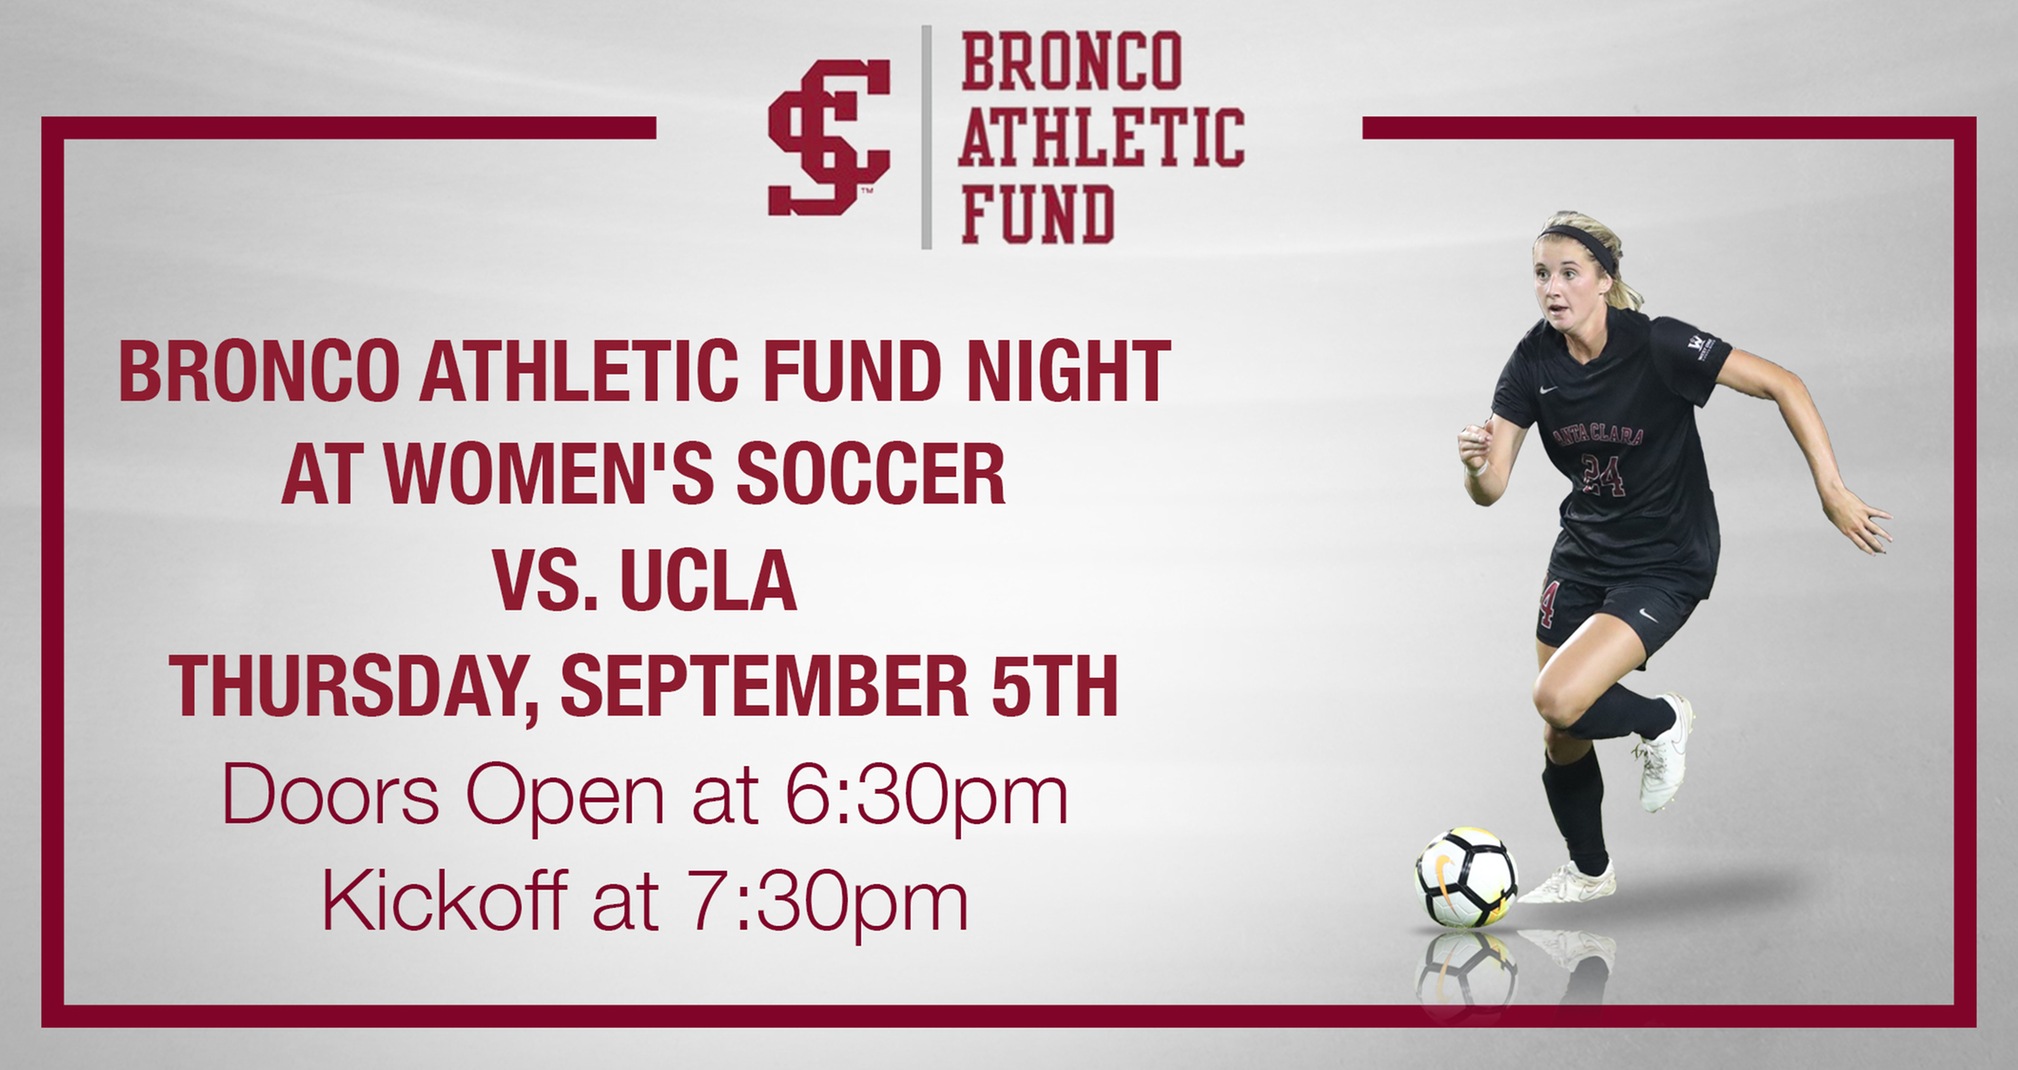 Registration Open for Bronco Athletic Fund Night at Women's Soccer